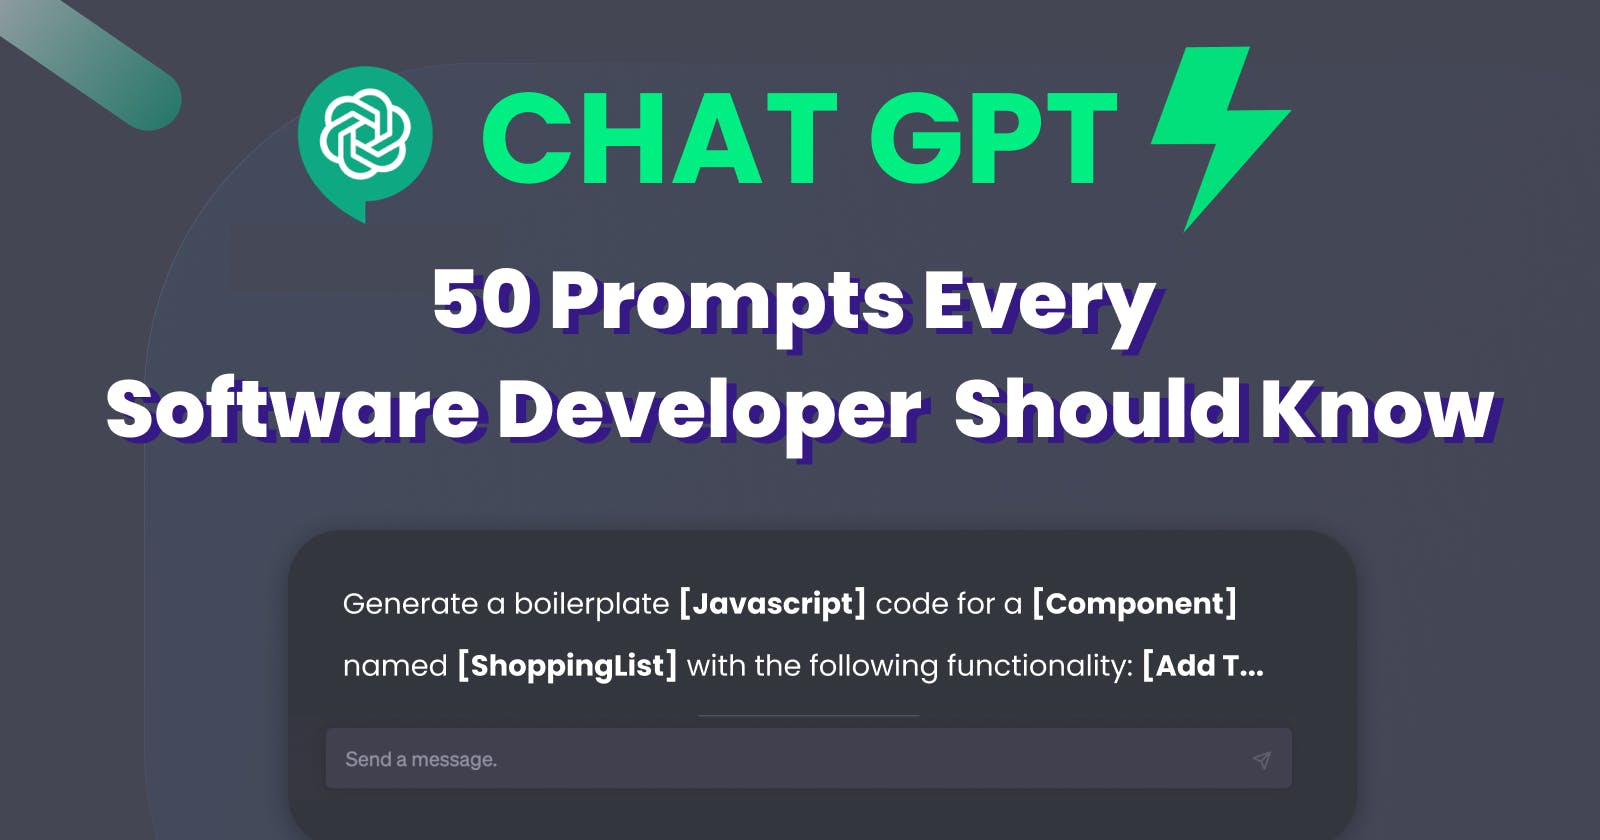 50 Chat GPT Prompts Every Software Developer Should Know (Tested)